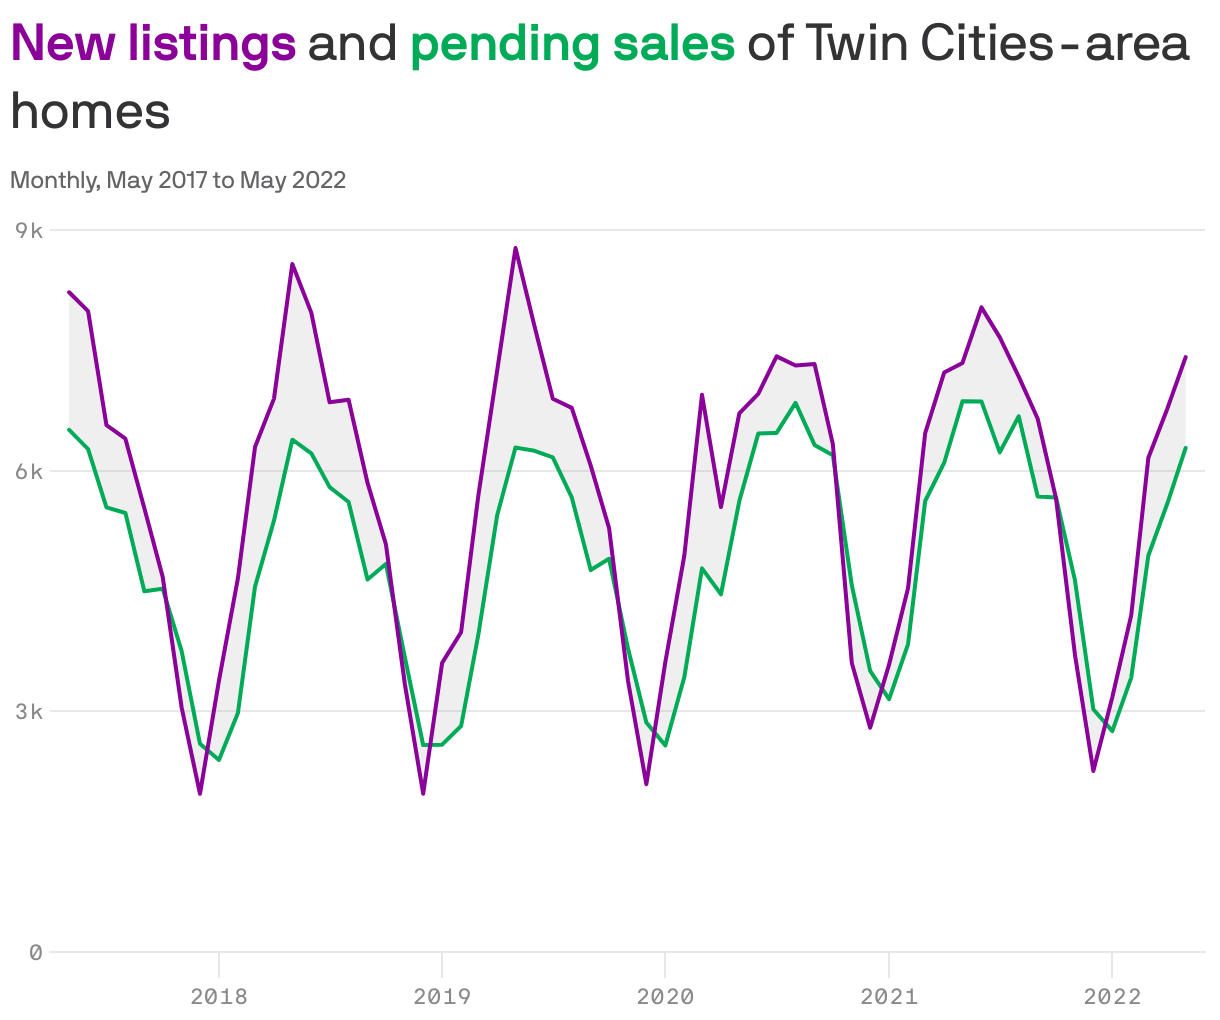 <b style='color: #8a0098'>New listings</b> and <b style='color: #00ab58'>pending sales</b> of Twin Cities-area homes